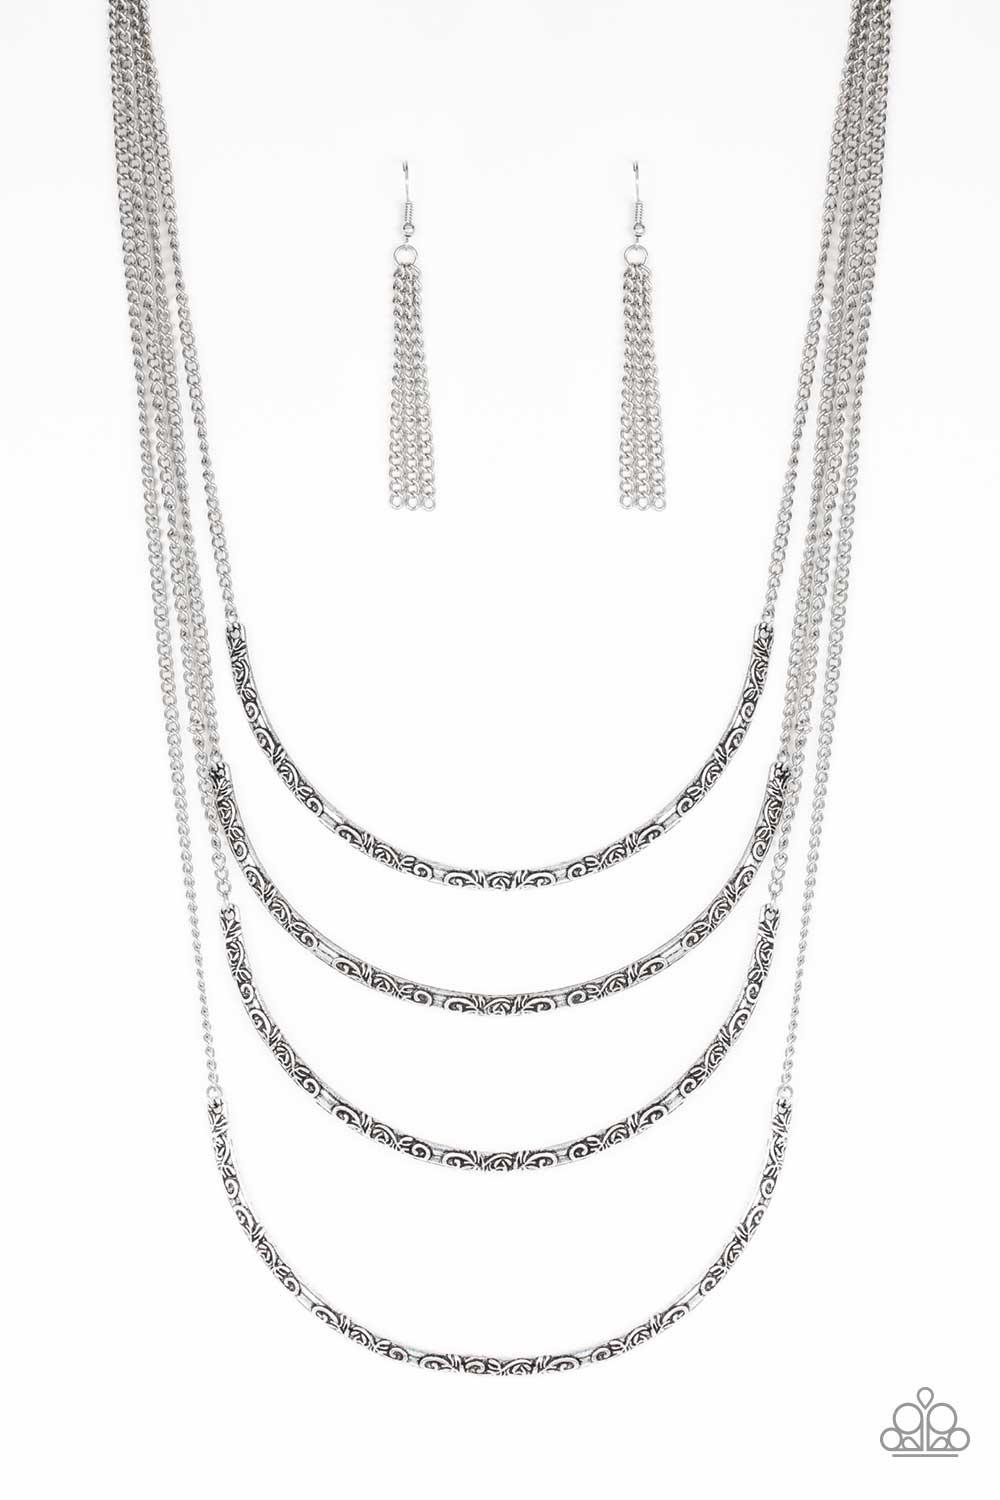 It Will Be Over MOON - Silver Necklace Set - Princess Glam Shop